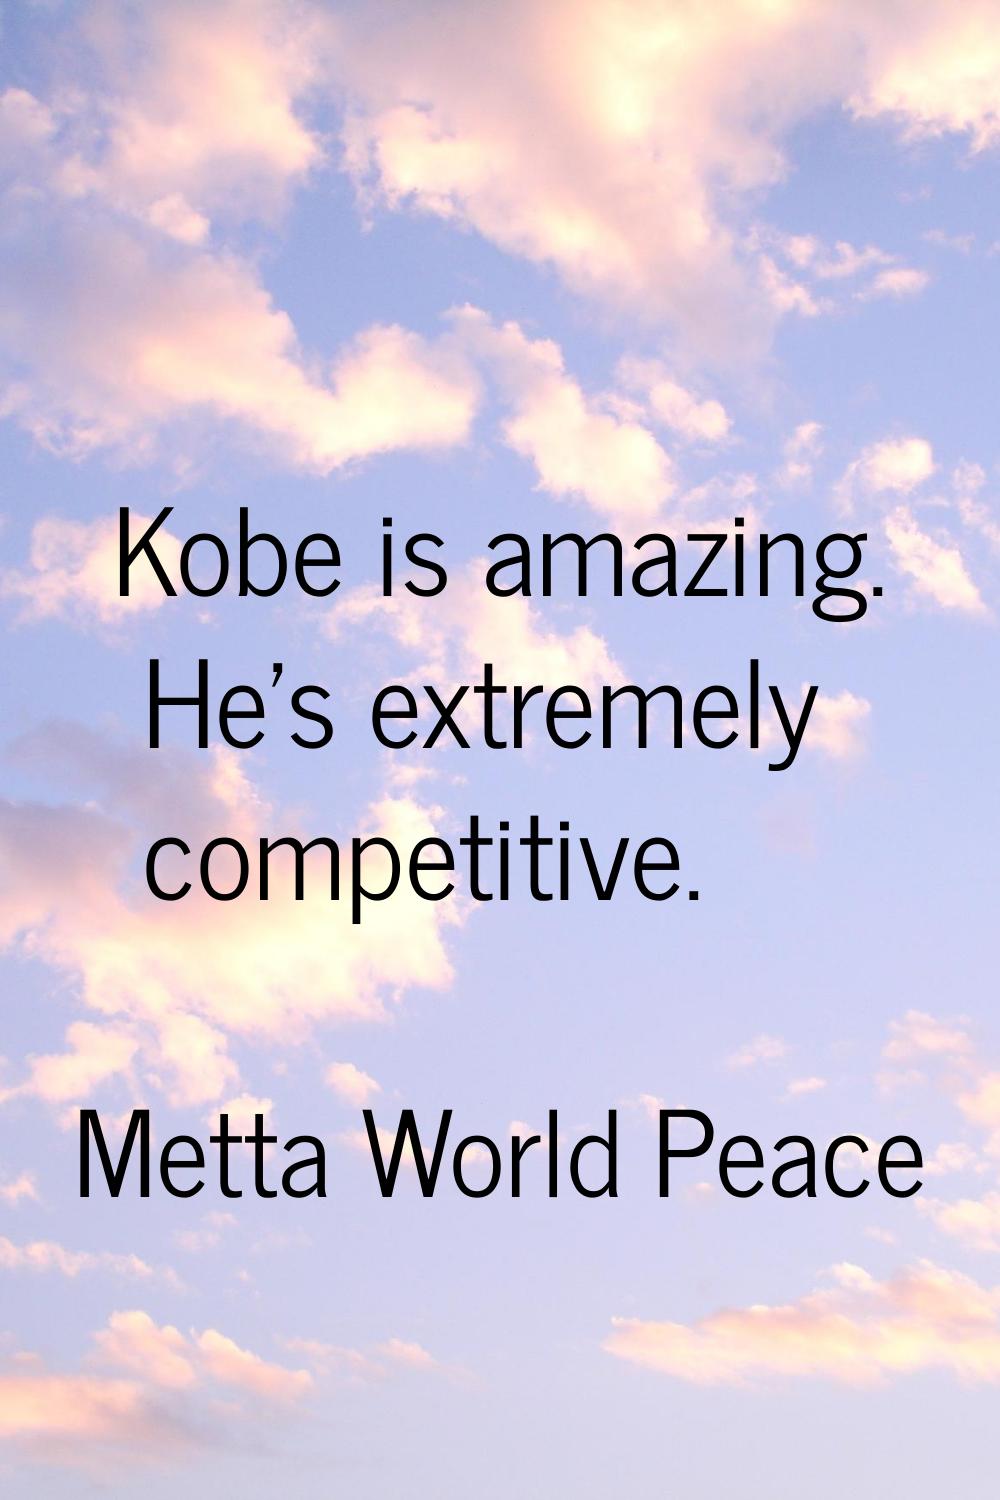 Kobe is amazing. He's extremely competitive.